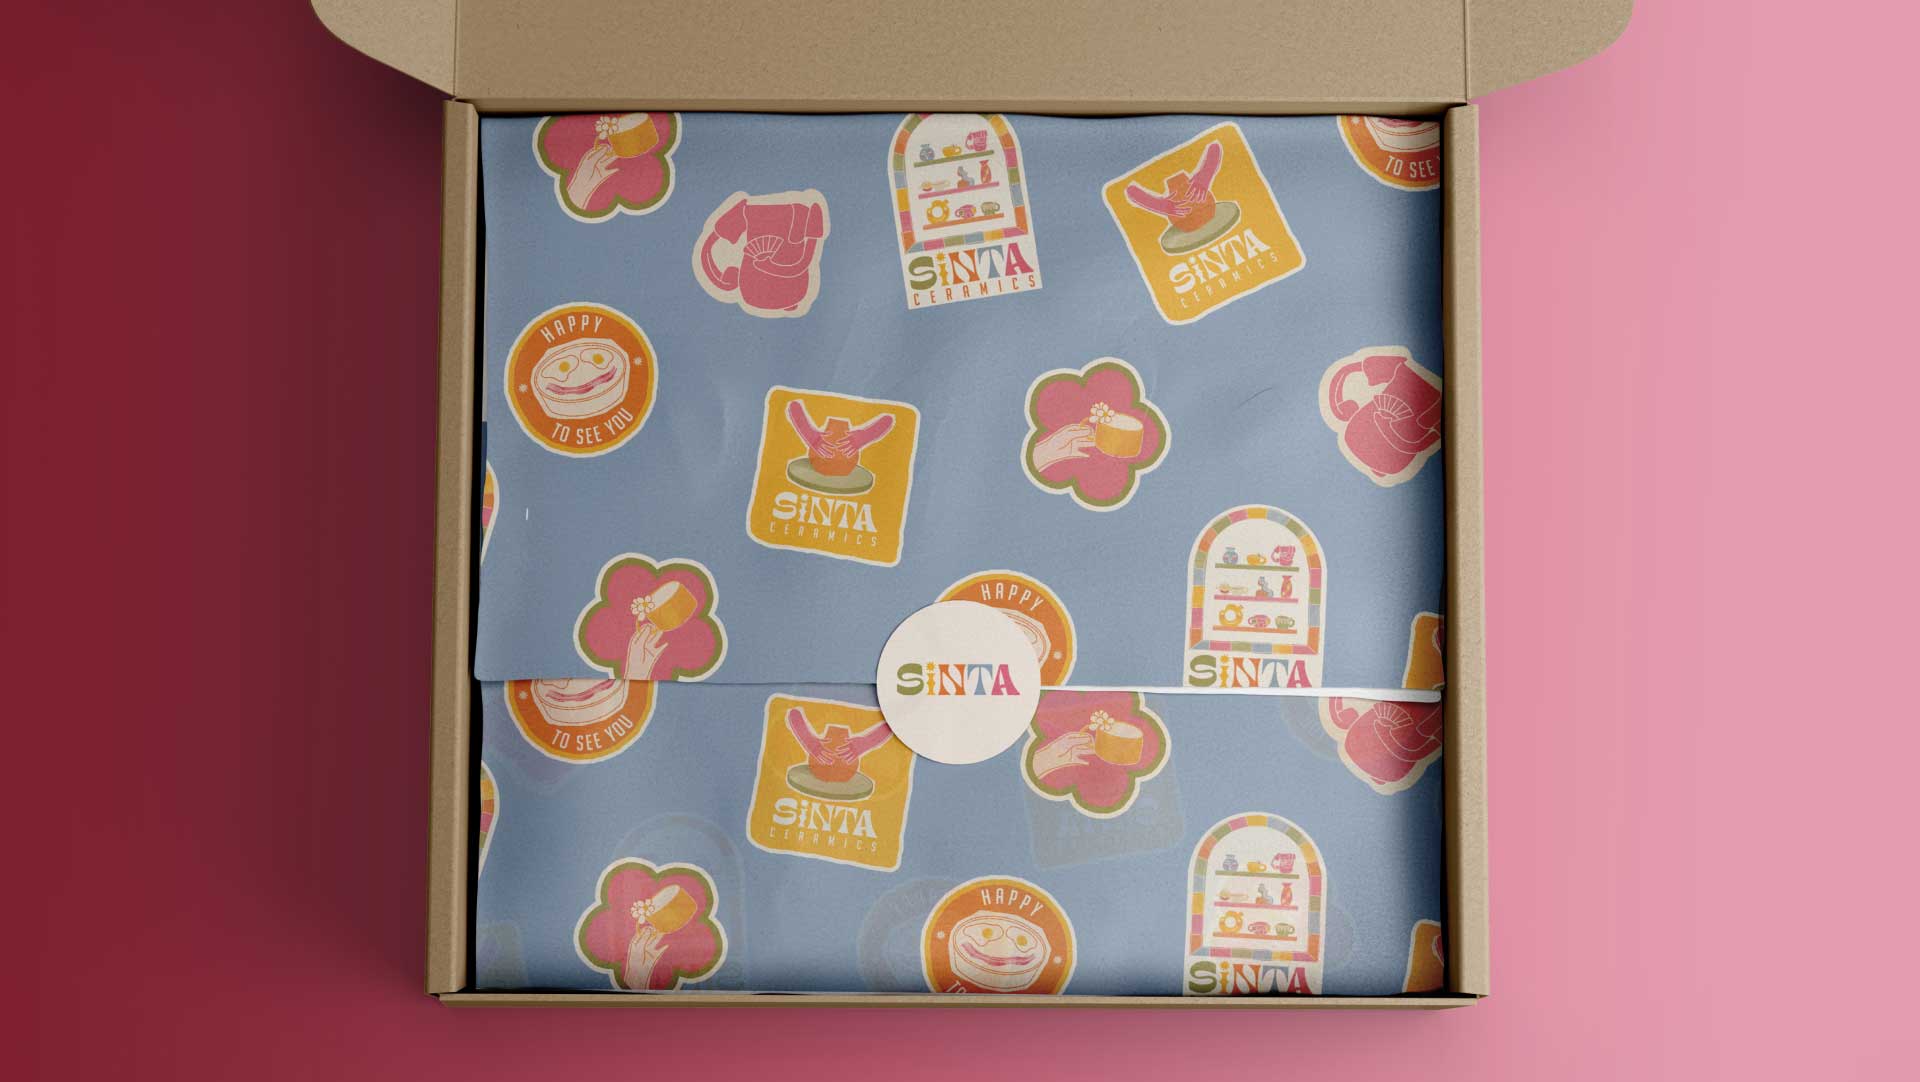 Wrapper product design for Sinta